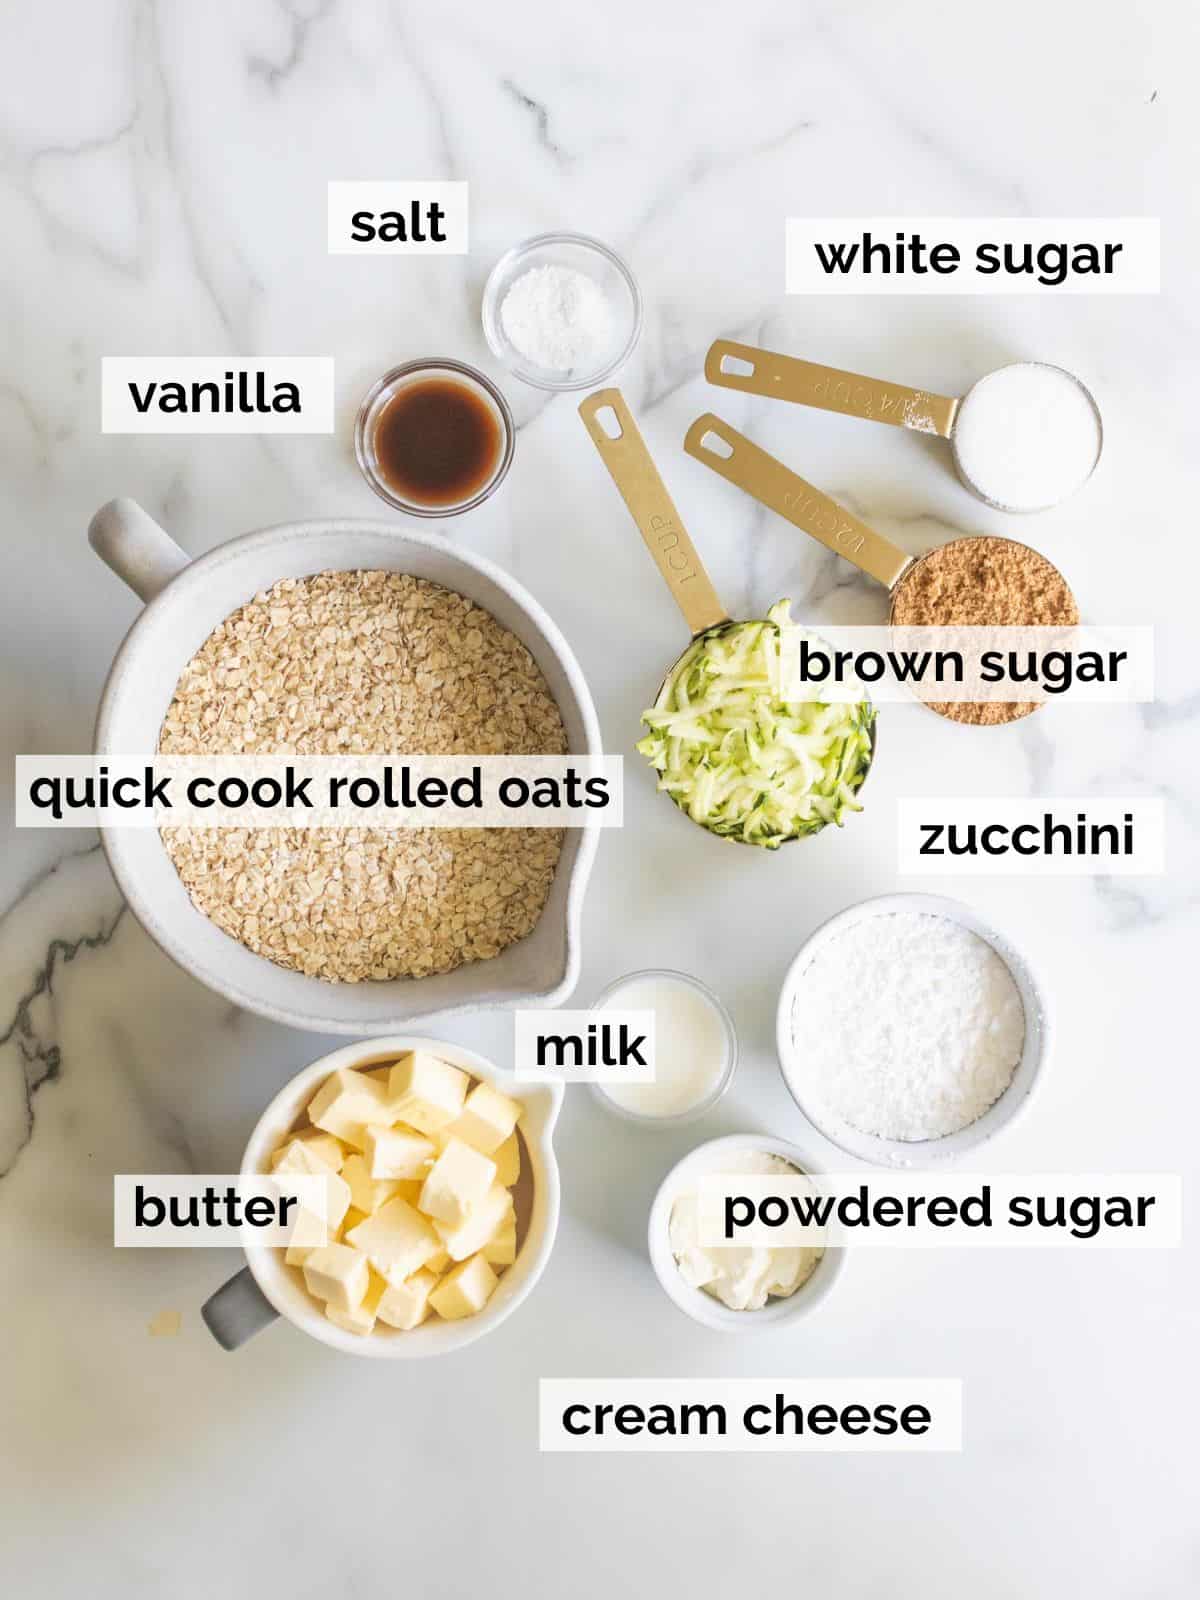 Ingredients for zucchini bars on a white background.